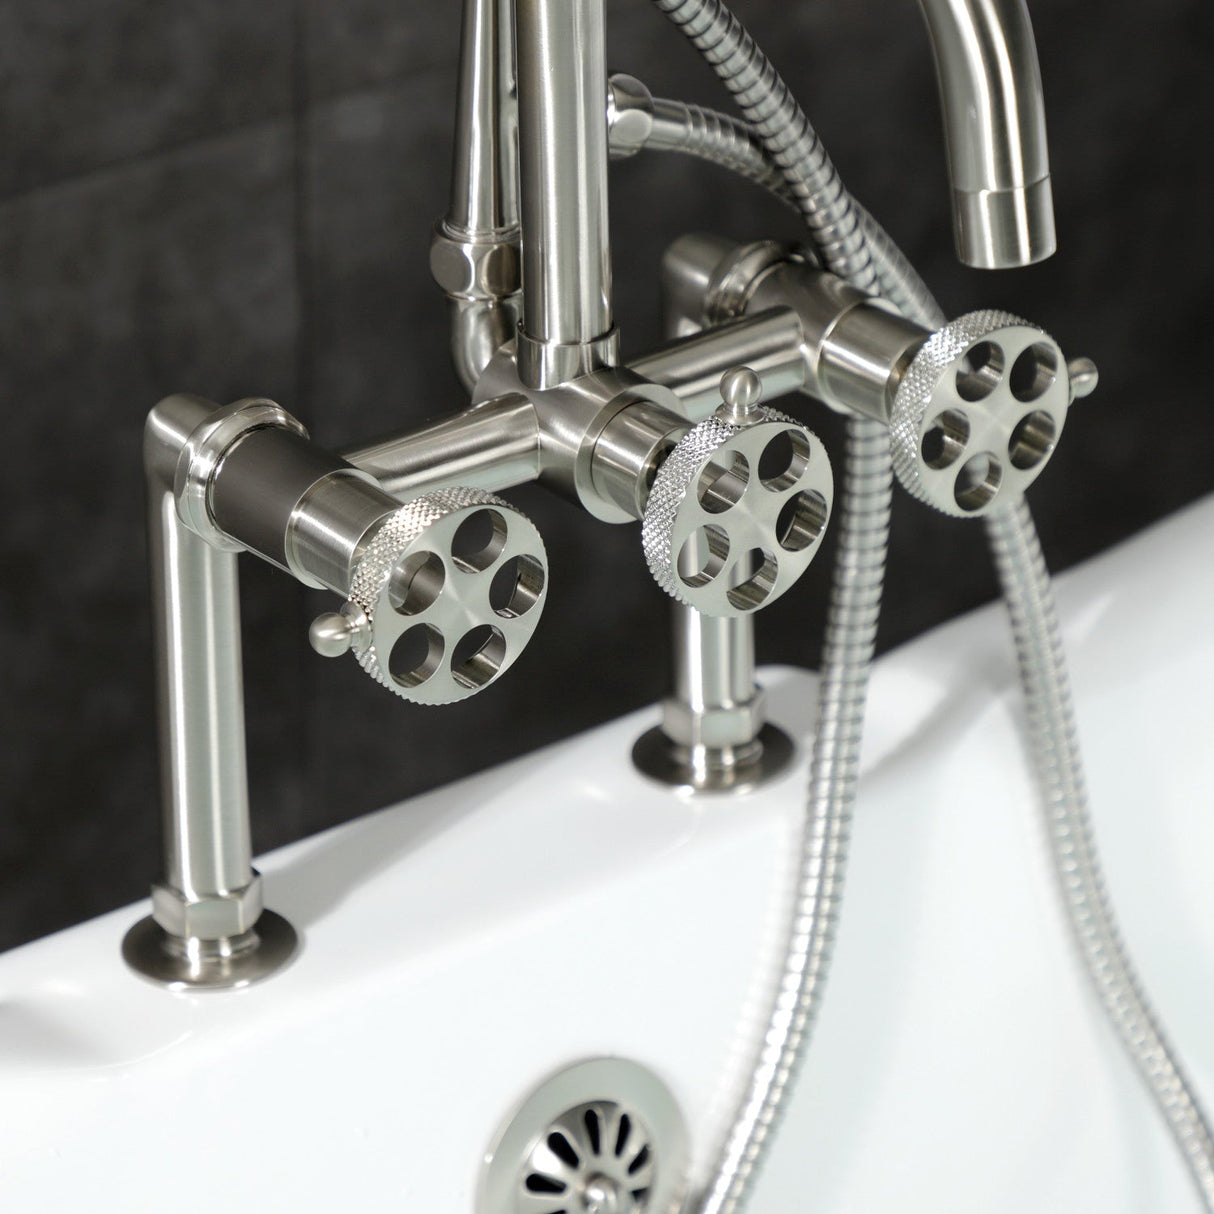 Webb AE8408RKX Three-Handle 2-Hole Deck Mount Clawfoot Tub Faucet with Knurled Handle and Hand Shower, Brushed Nickel